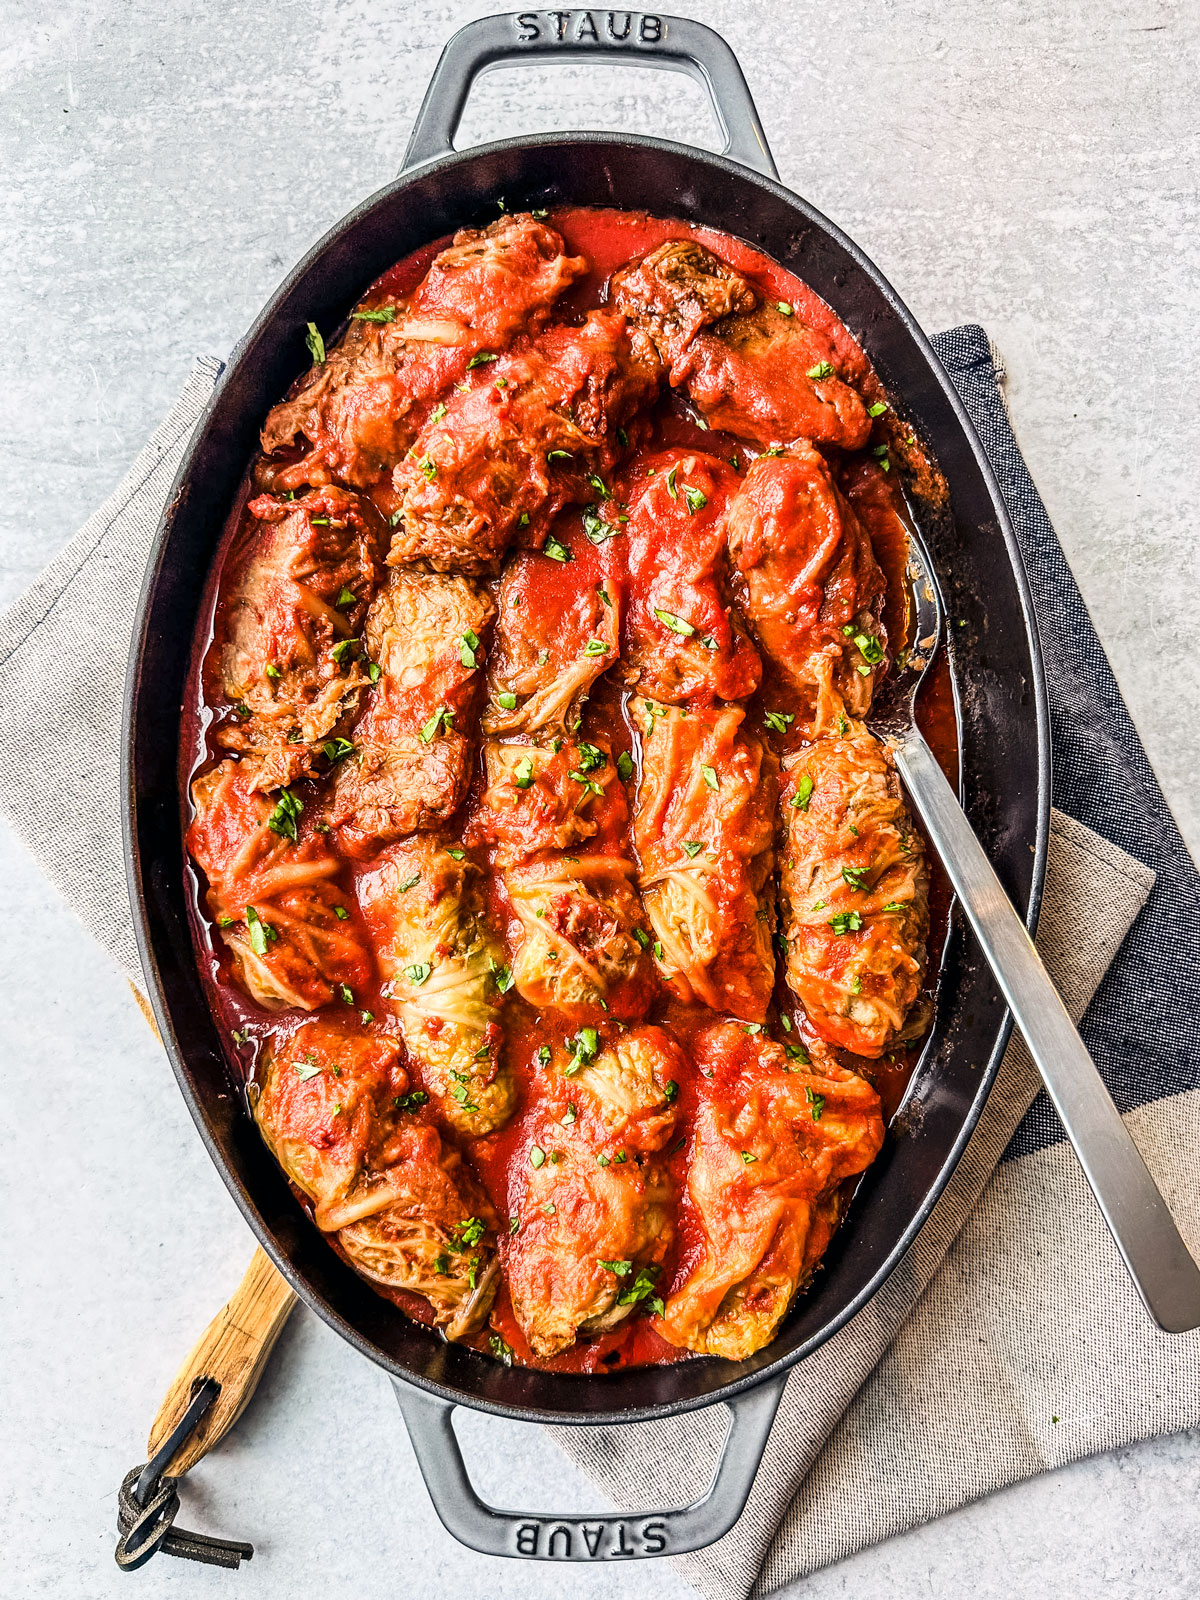 Baking tray of Ukrainian cabbage rolls with ground beef.